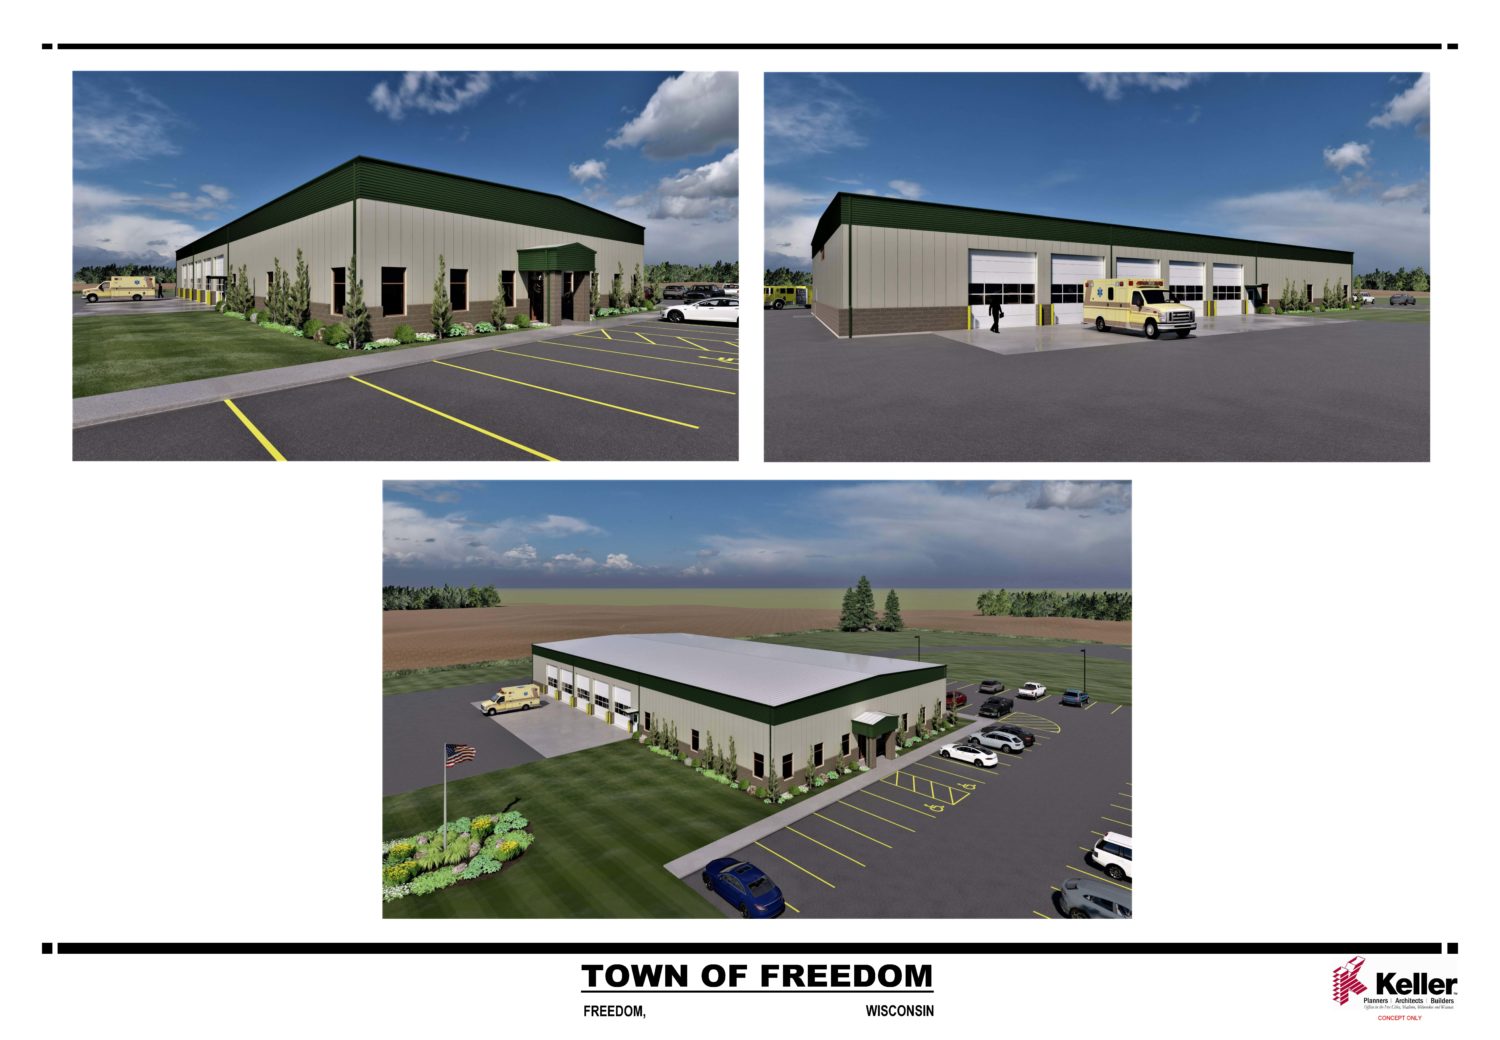 freedom - Keller, Inc. to Build for the Town of Freedom